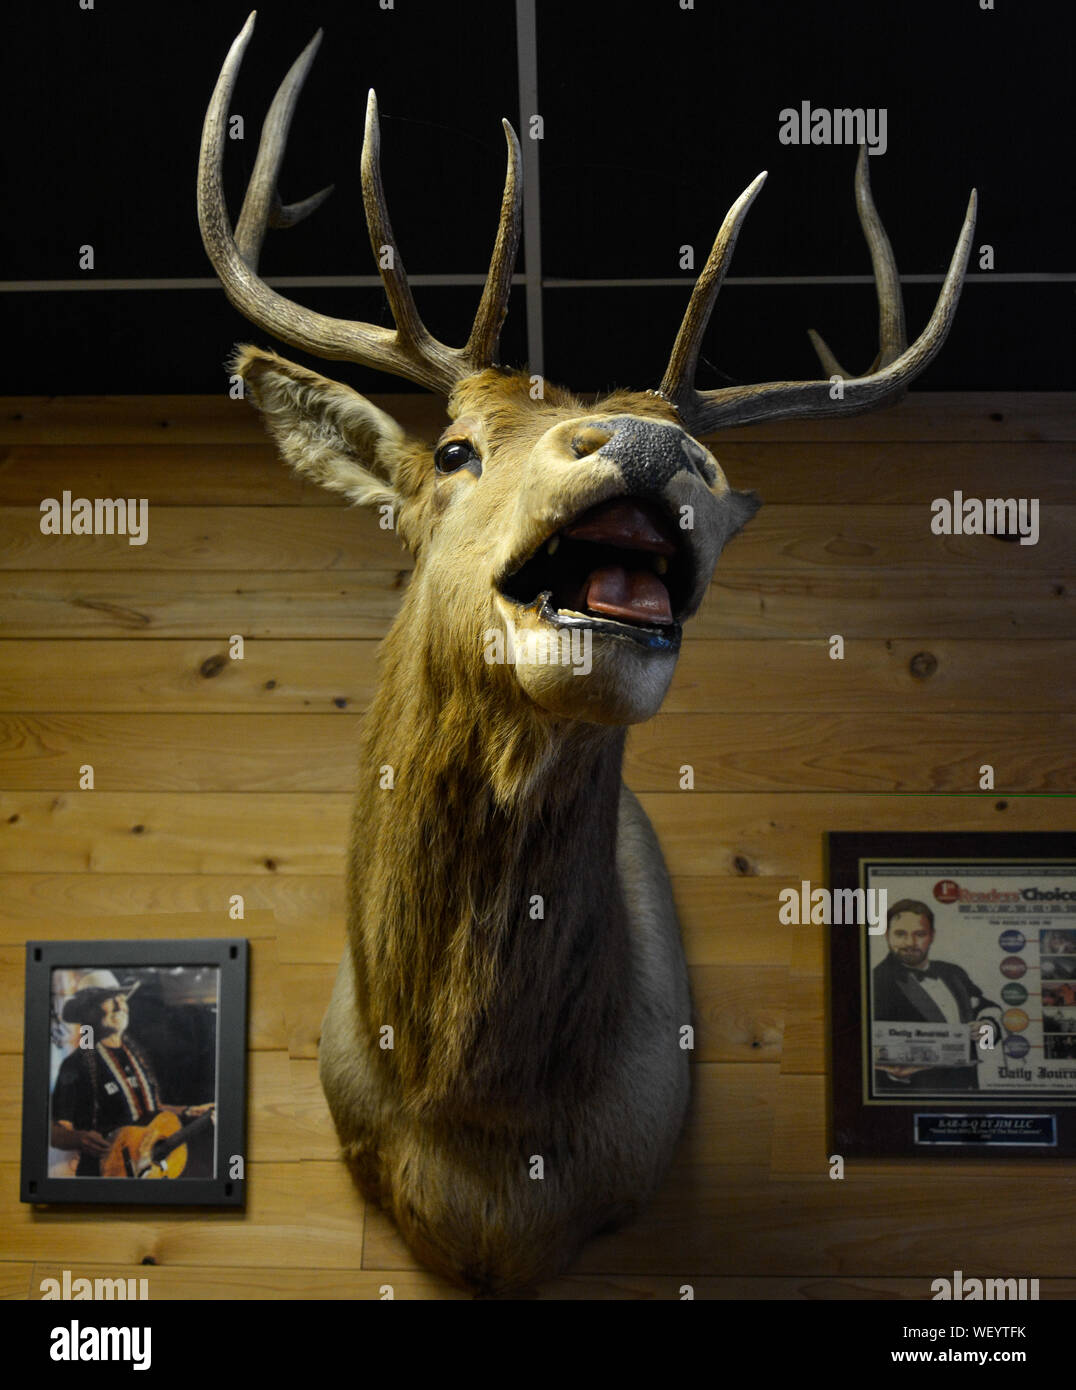 An old style interior for Bar-B-Q by Jim restaurant, with deer head with antlers wall mount with photographs and posters in Tupelo, MS, USA Stock Photo